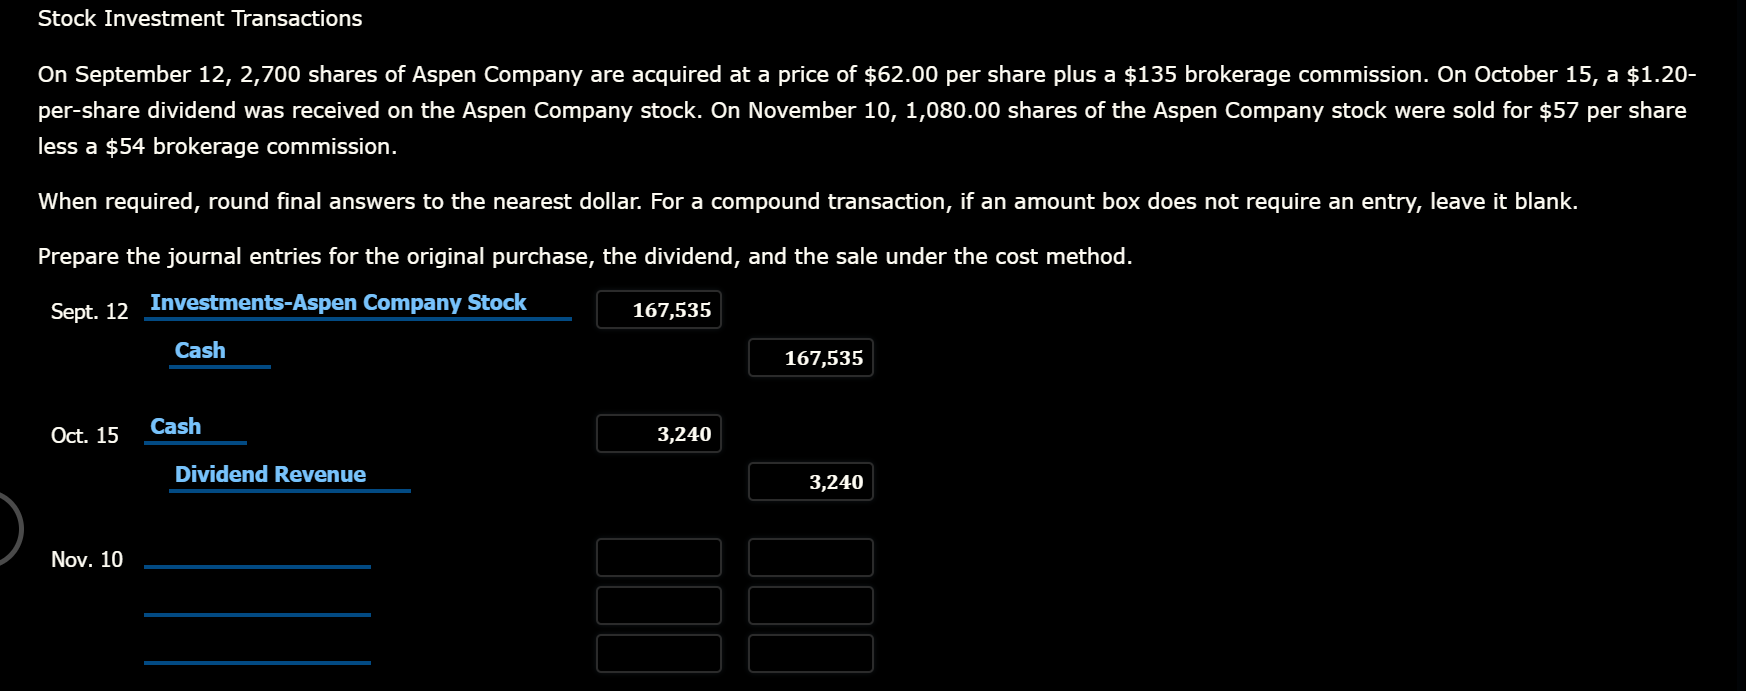 Stock Investment Transactions
On September 12, 2,700 shares of Aspen Company are acquired at a price of $62.00 per share plus a $135 brokerage commission. On October 15, a $1.20-
per-share dividend was received on the Aspen Company stock. On November 10, 1,080.00 shares of the Aspen Company stock were sold for $57 per share
less a $54 brokerage commission.
When required, round final answers to the nearest dollar. For a compound transaction, if an amount box does not require an entry, leave it blank.
Prepare the journal entries for the original purchase, the dividend, and the sale under the cost method.
Sept. 12
Investments-Aspen Company Stock
167,535
Cash
167,535
Oct. 15
Cash
3,240
Dividend Revenue
3,240
Nov. 10
